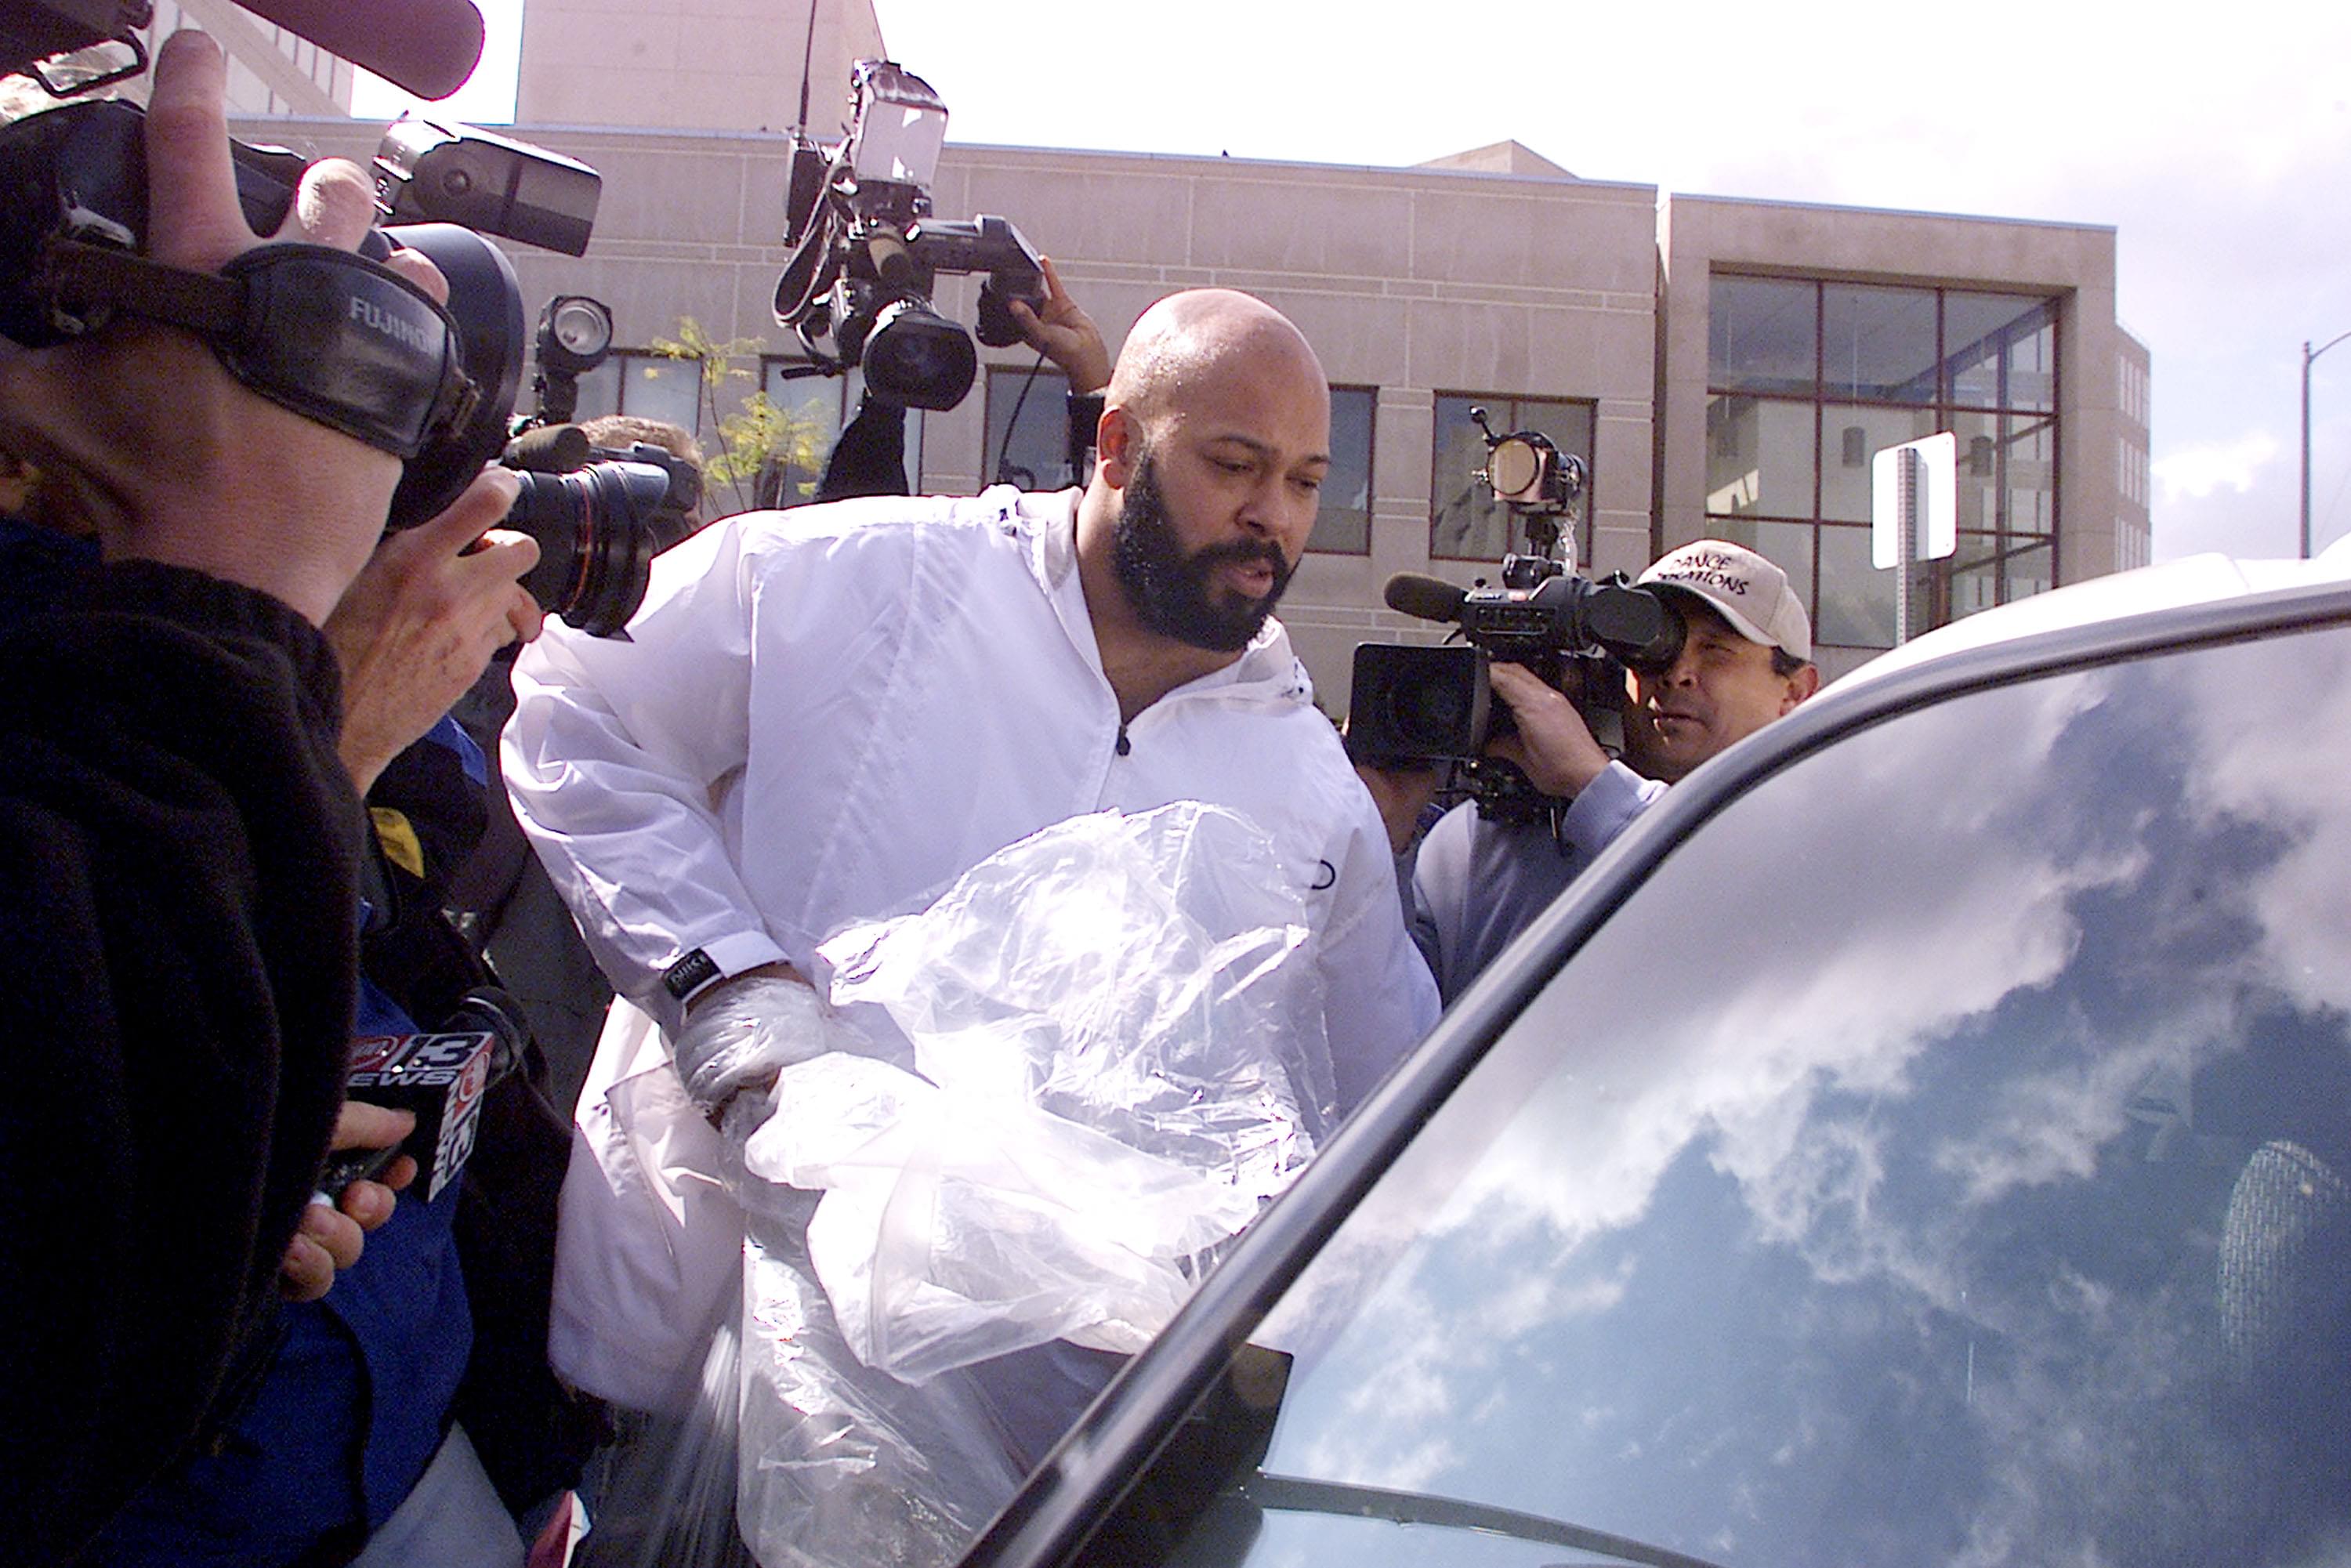 New Death Row Documentary Dropping Soon With Suge Knight Exclusives